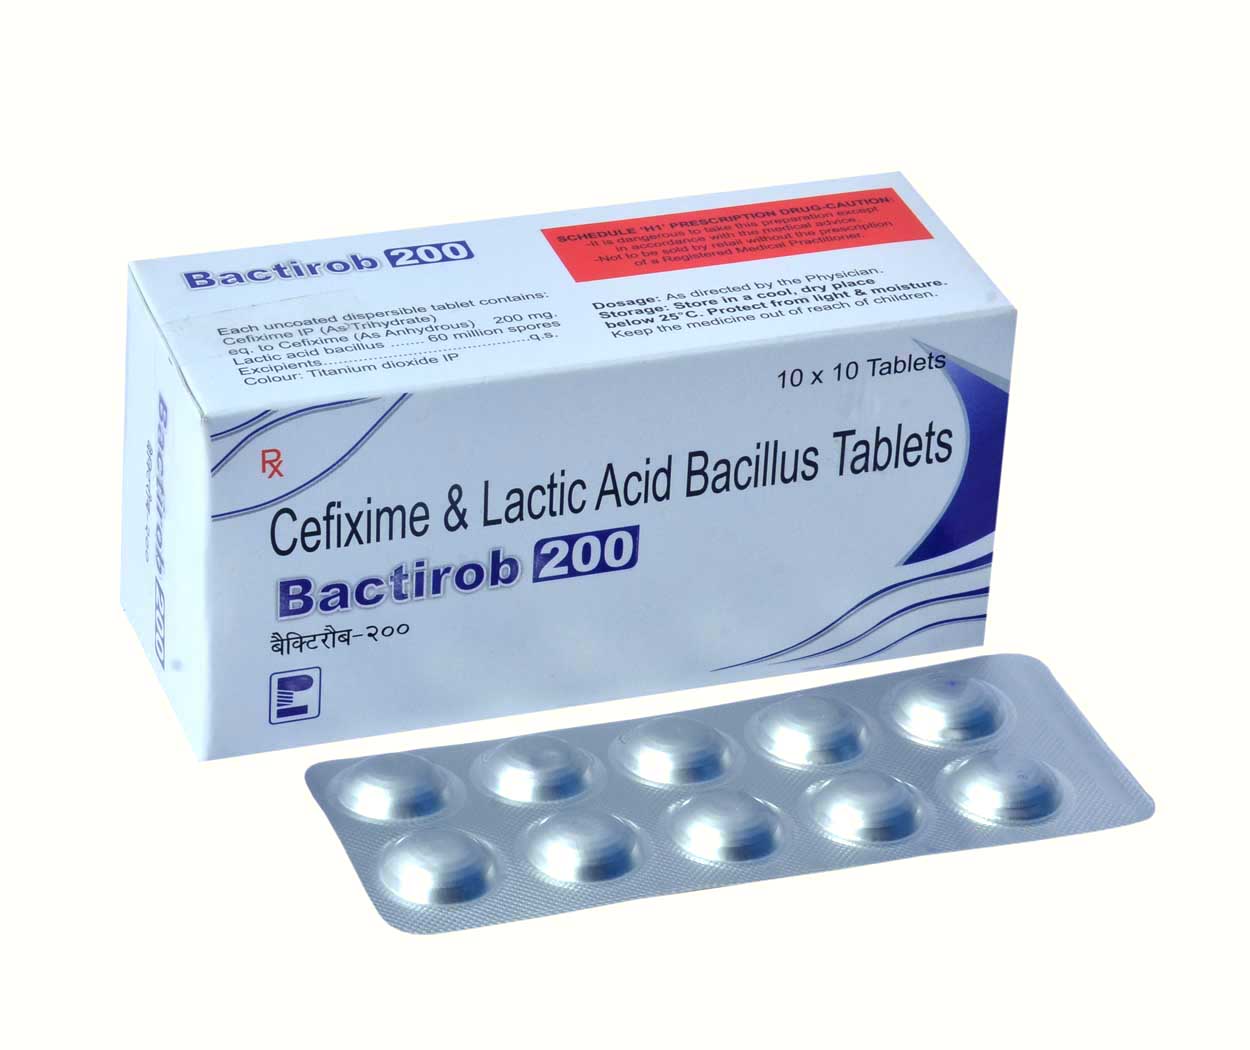 Product Name: Bactirob 200, Compositions of Bactirob 200 are Cefixime & Lactic Acid Bacillus Tablets - Park Pharmaceuticals